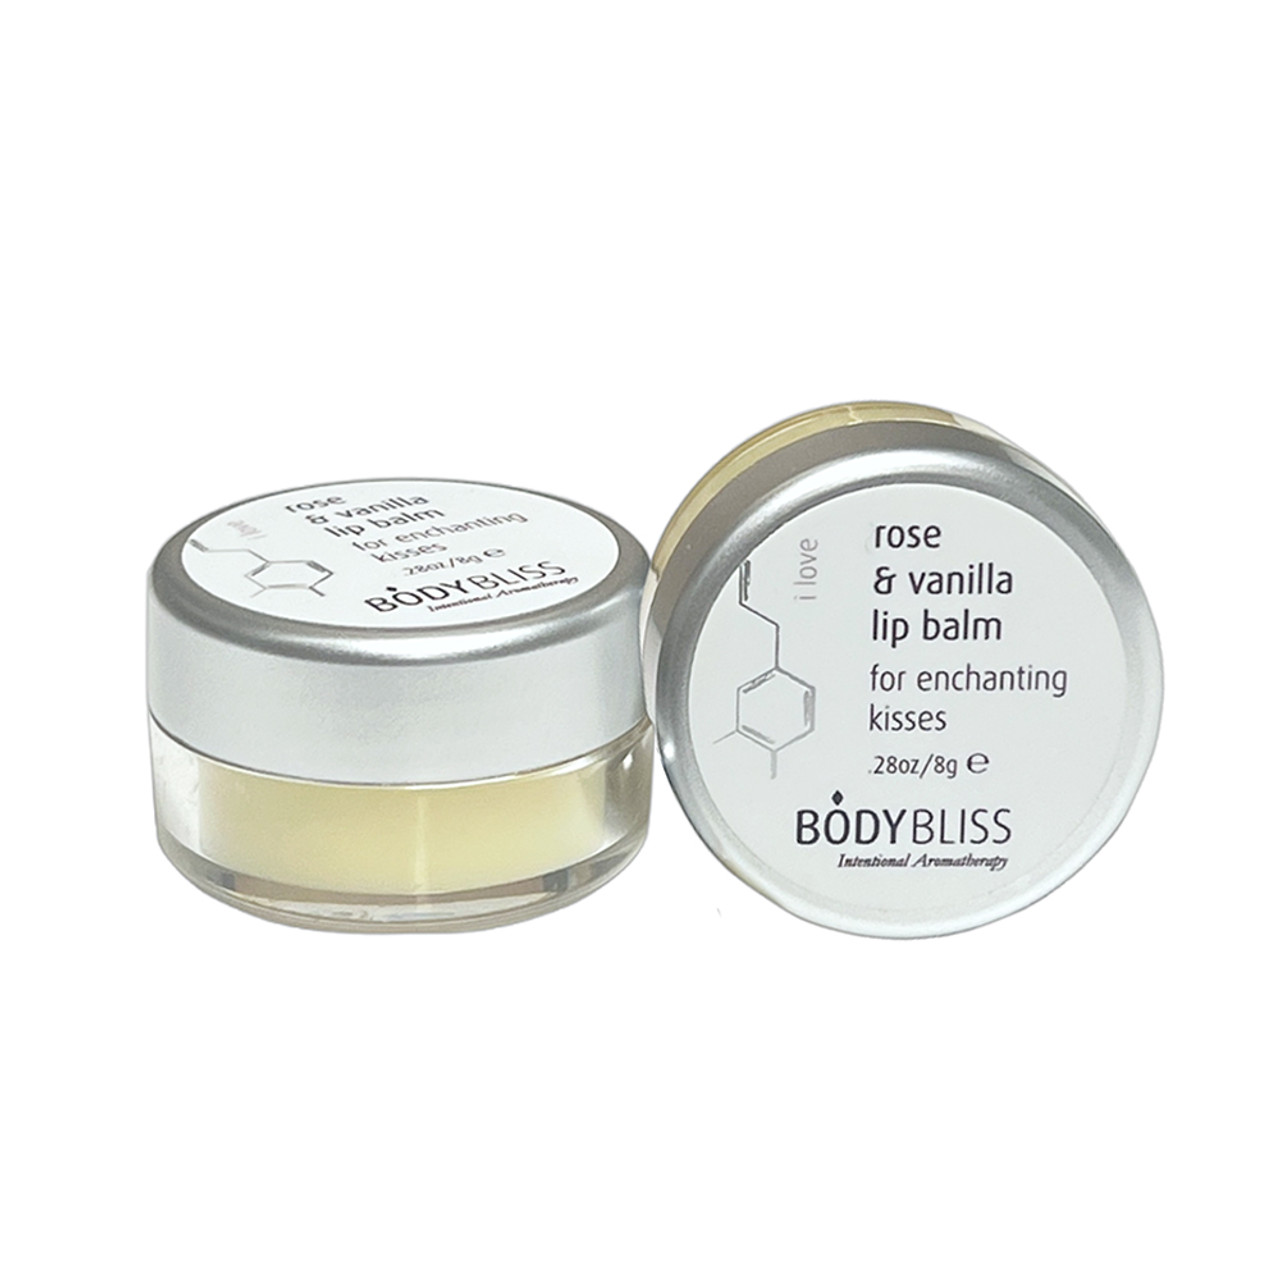 Our Body Bliss™ – BodyBliss